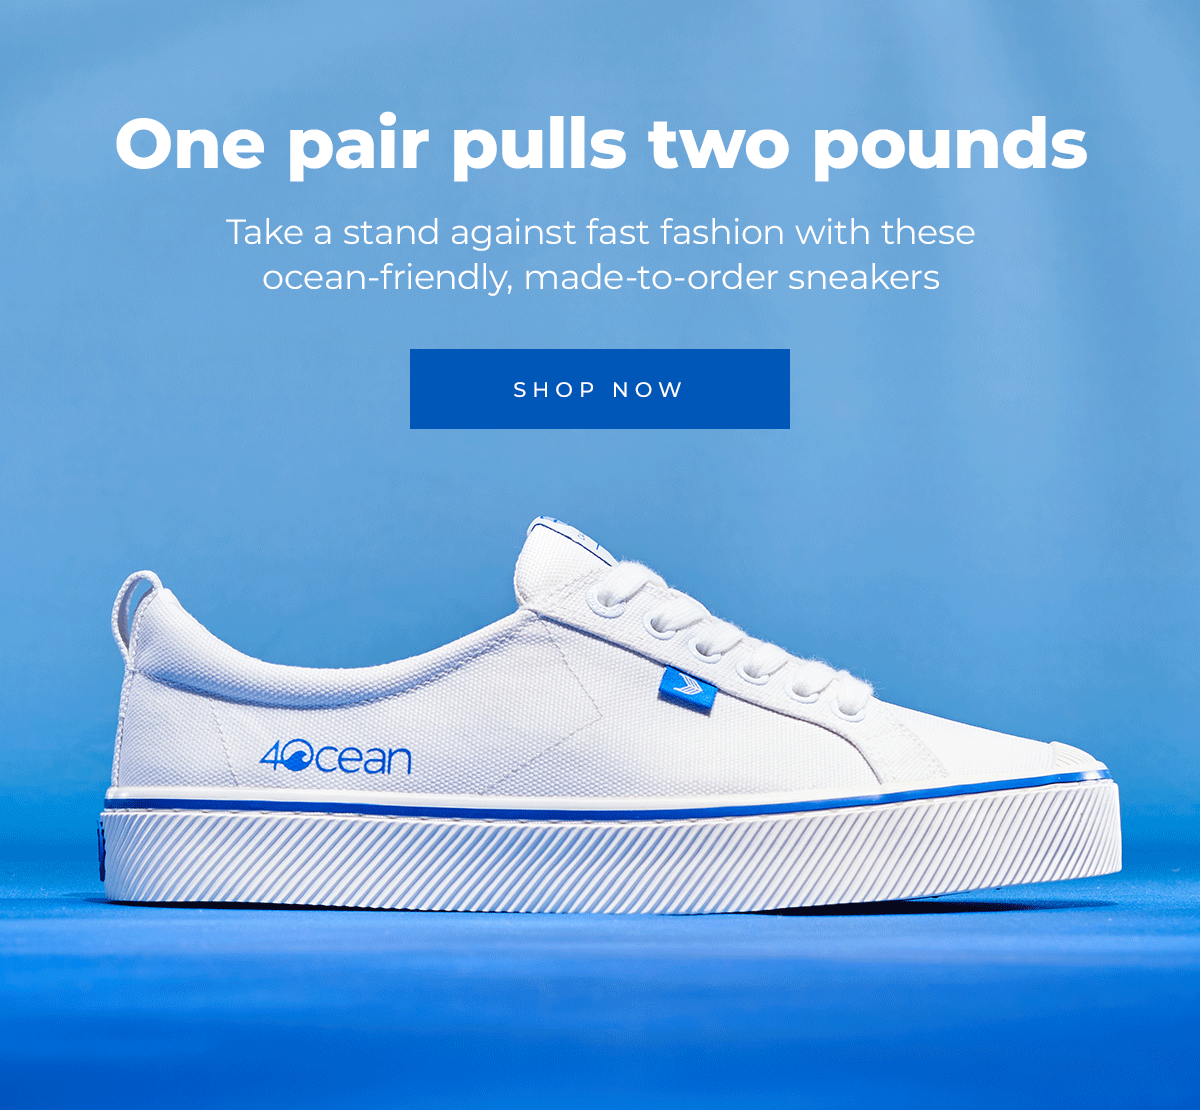 One pair pulls two pounds  Take a stand against fast fashion with these ocean-friendly, made-to-order sneakers  Shop Now